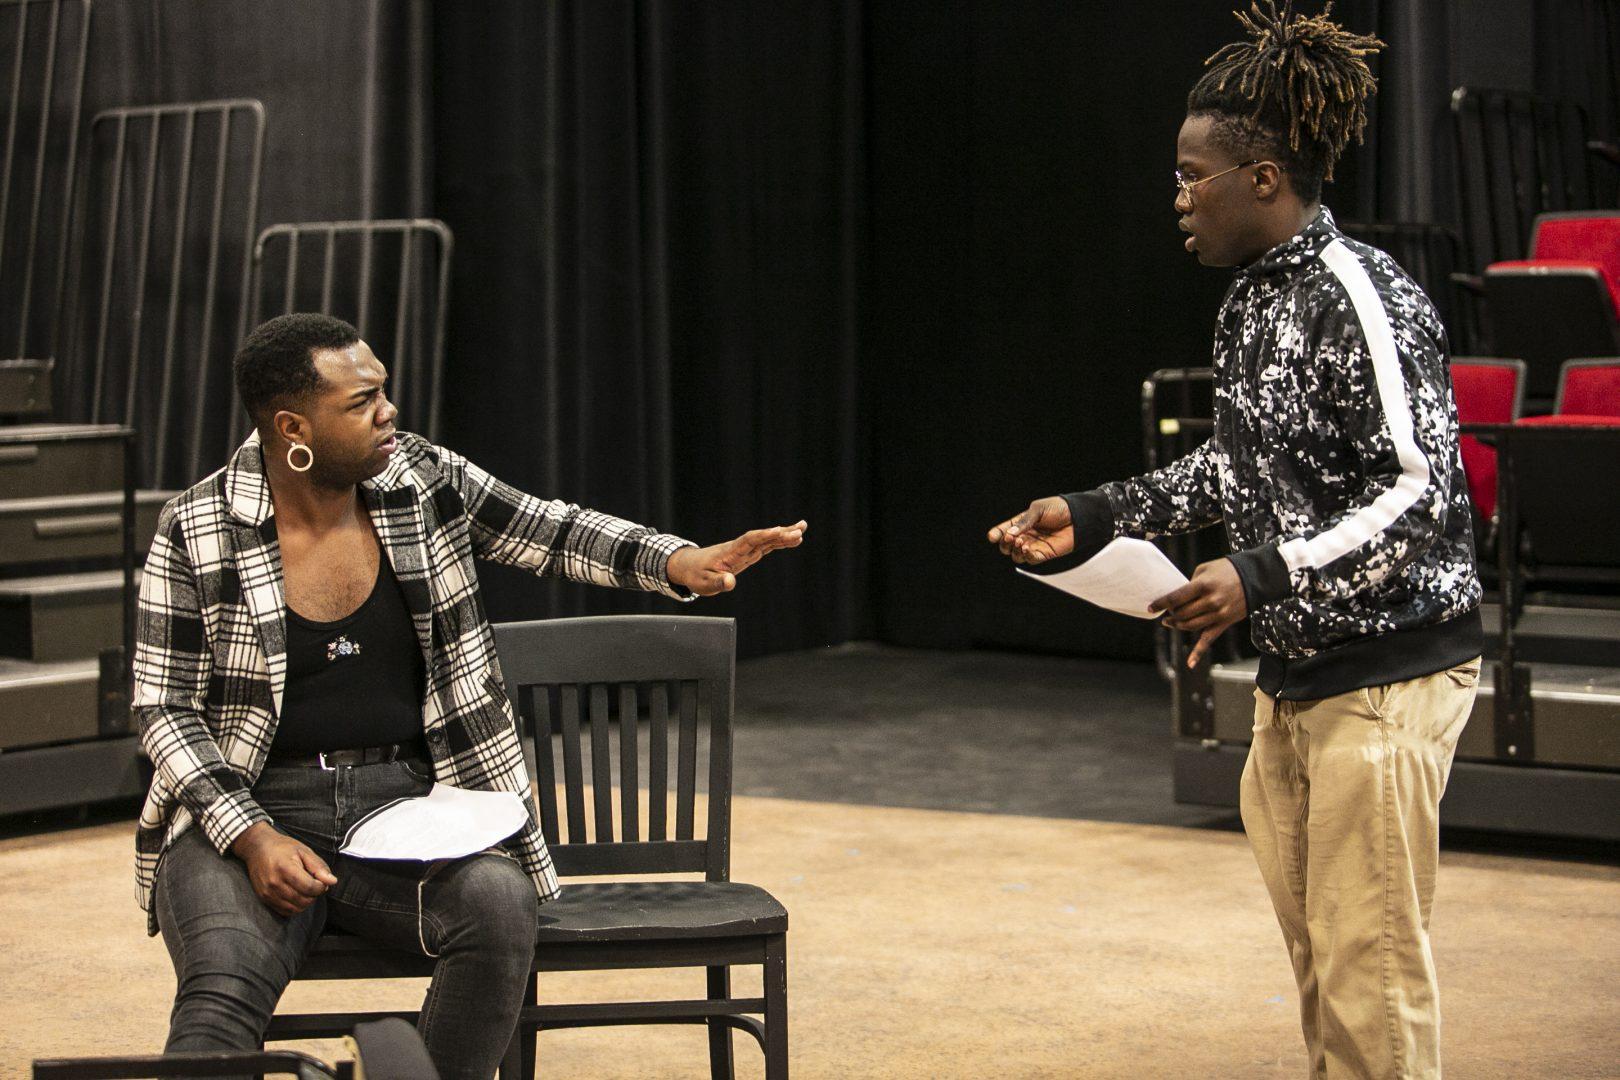 Derek Brown and Jimmy Haynie audition for the play Detroit 67 in the Dennis & Cheryl Woods Theatre on Wednesday, Jan. 22, 2020.
Photo By: Larry Valenzuela